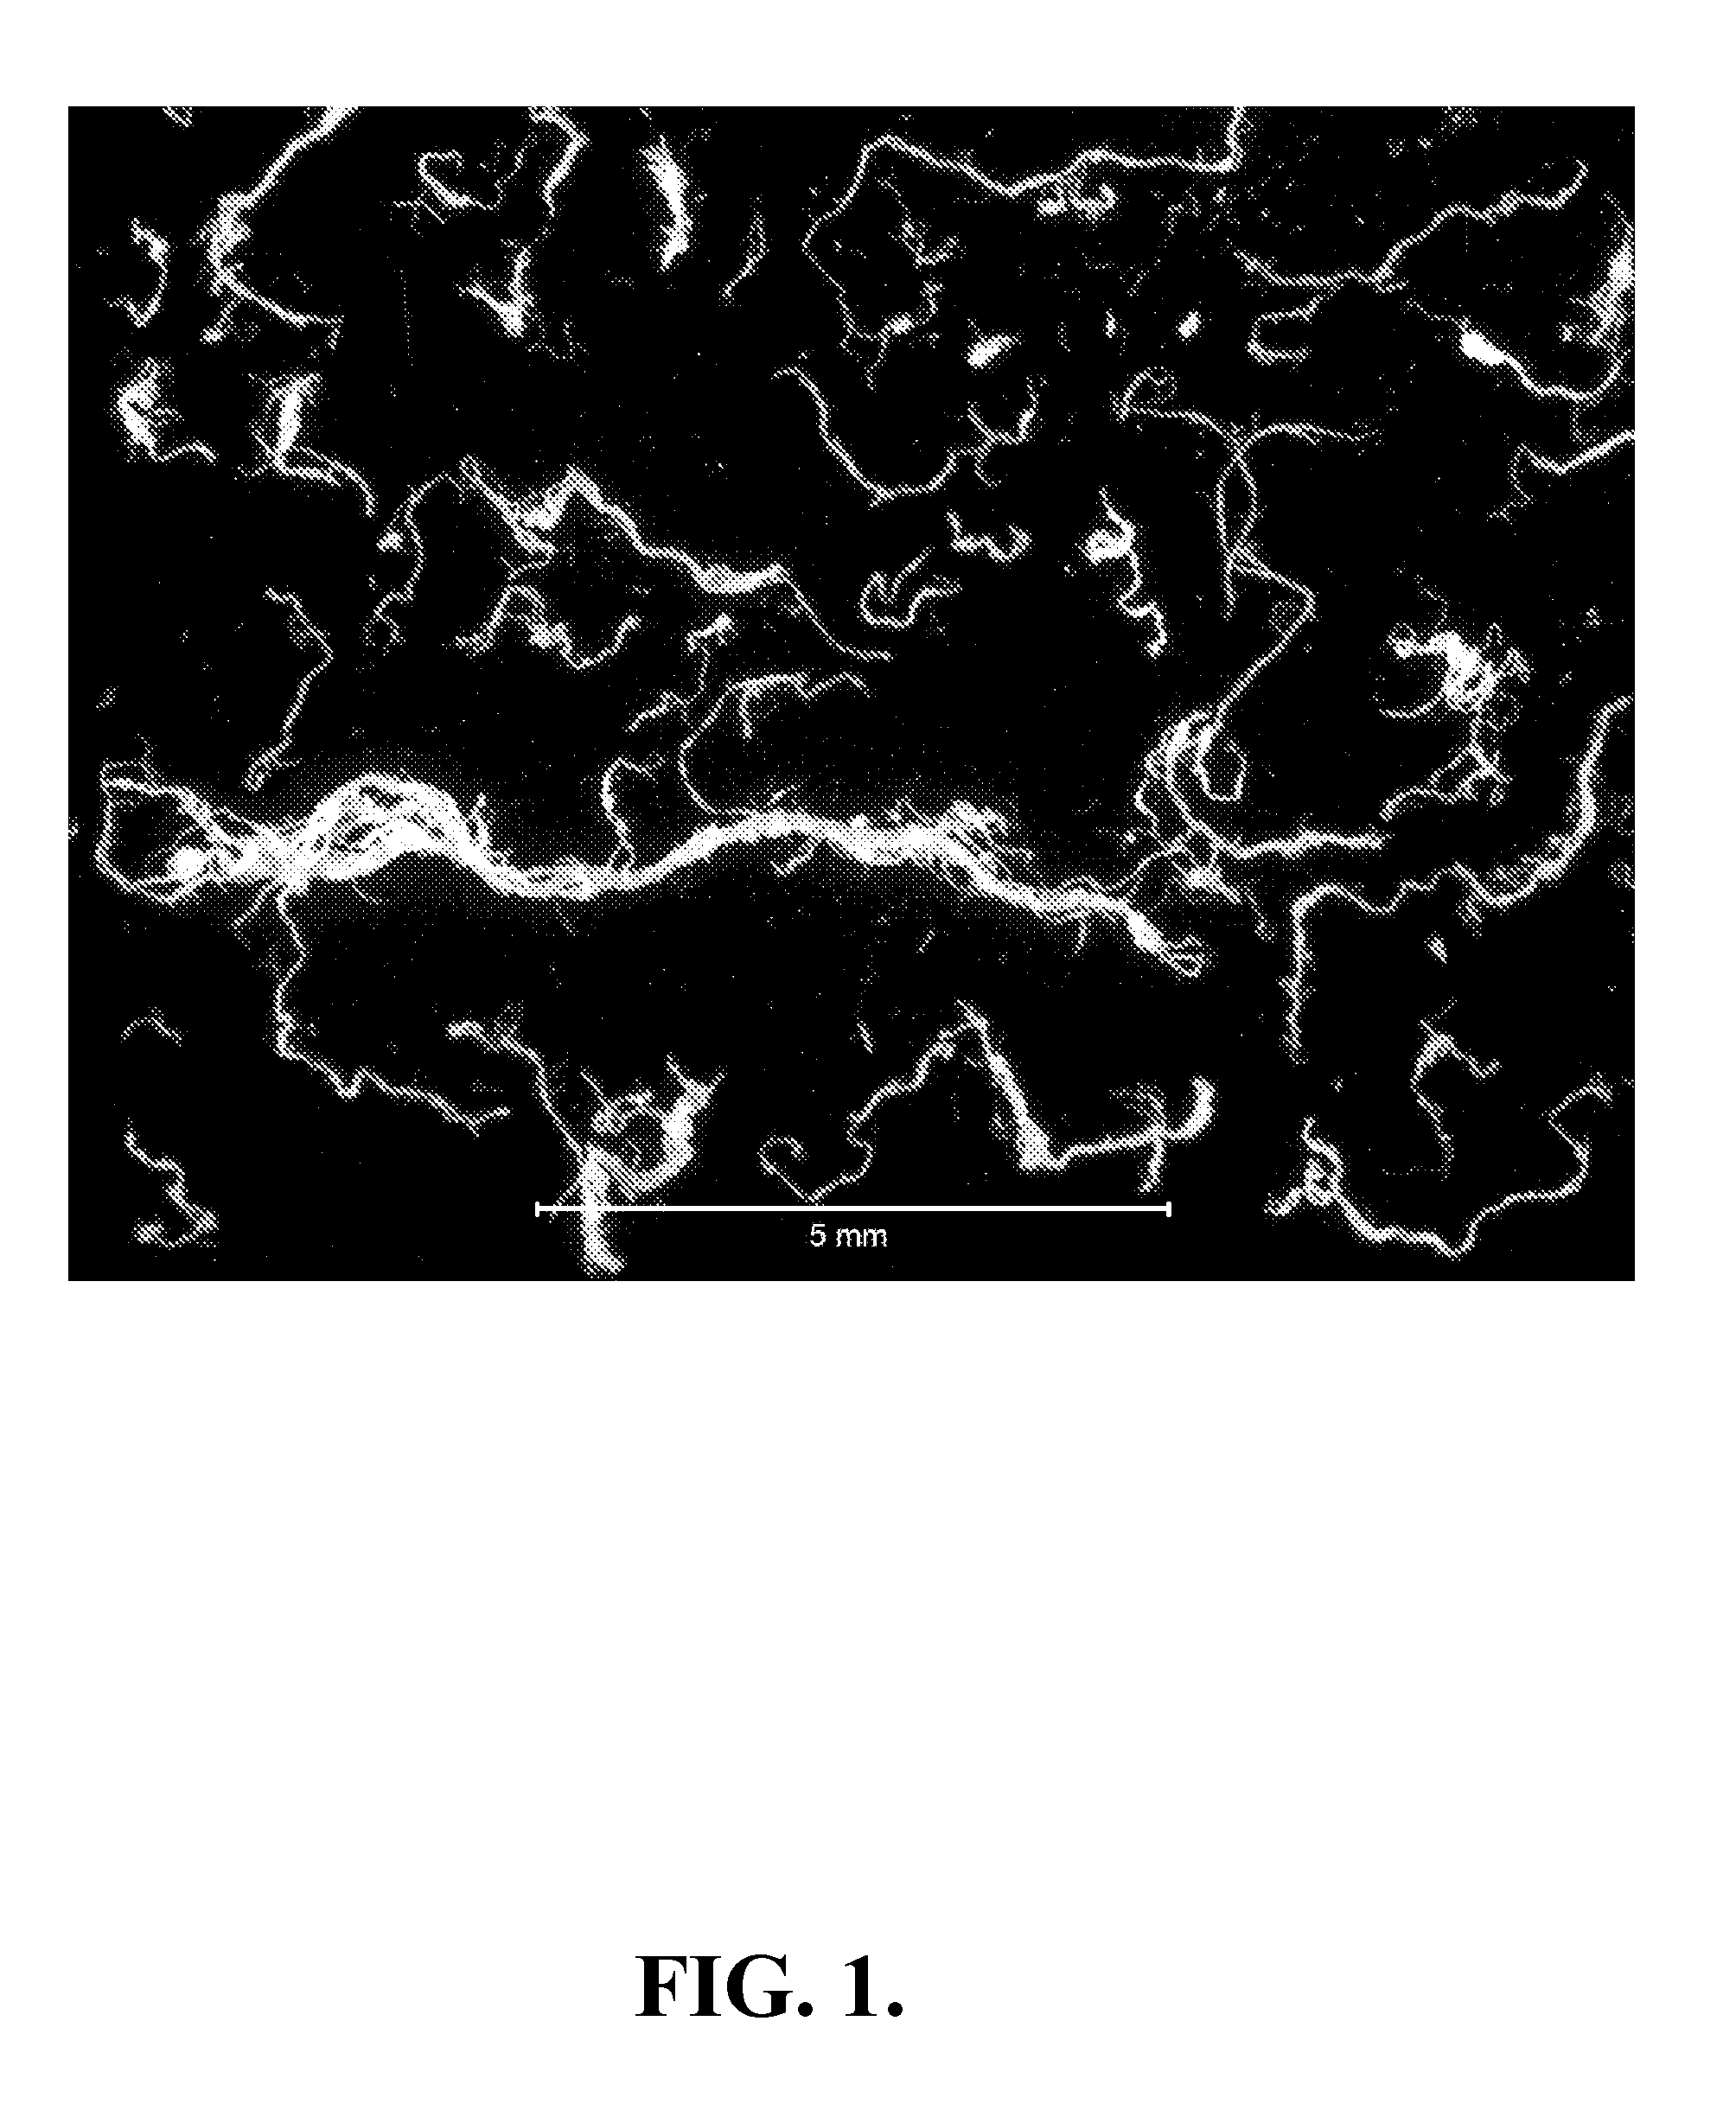 Methods for the preparation of mixed polymer superabsorbent fibers containing cellulose